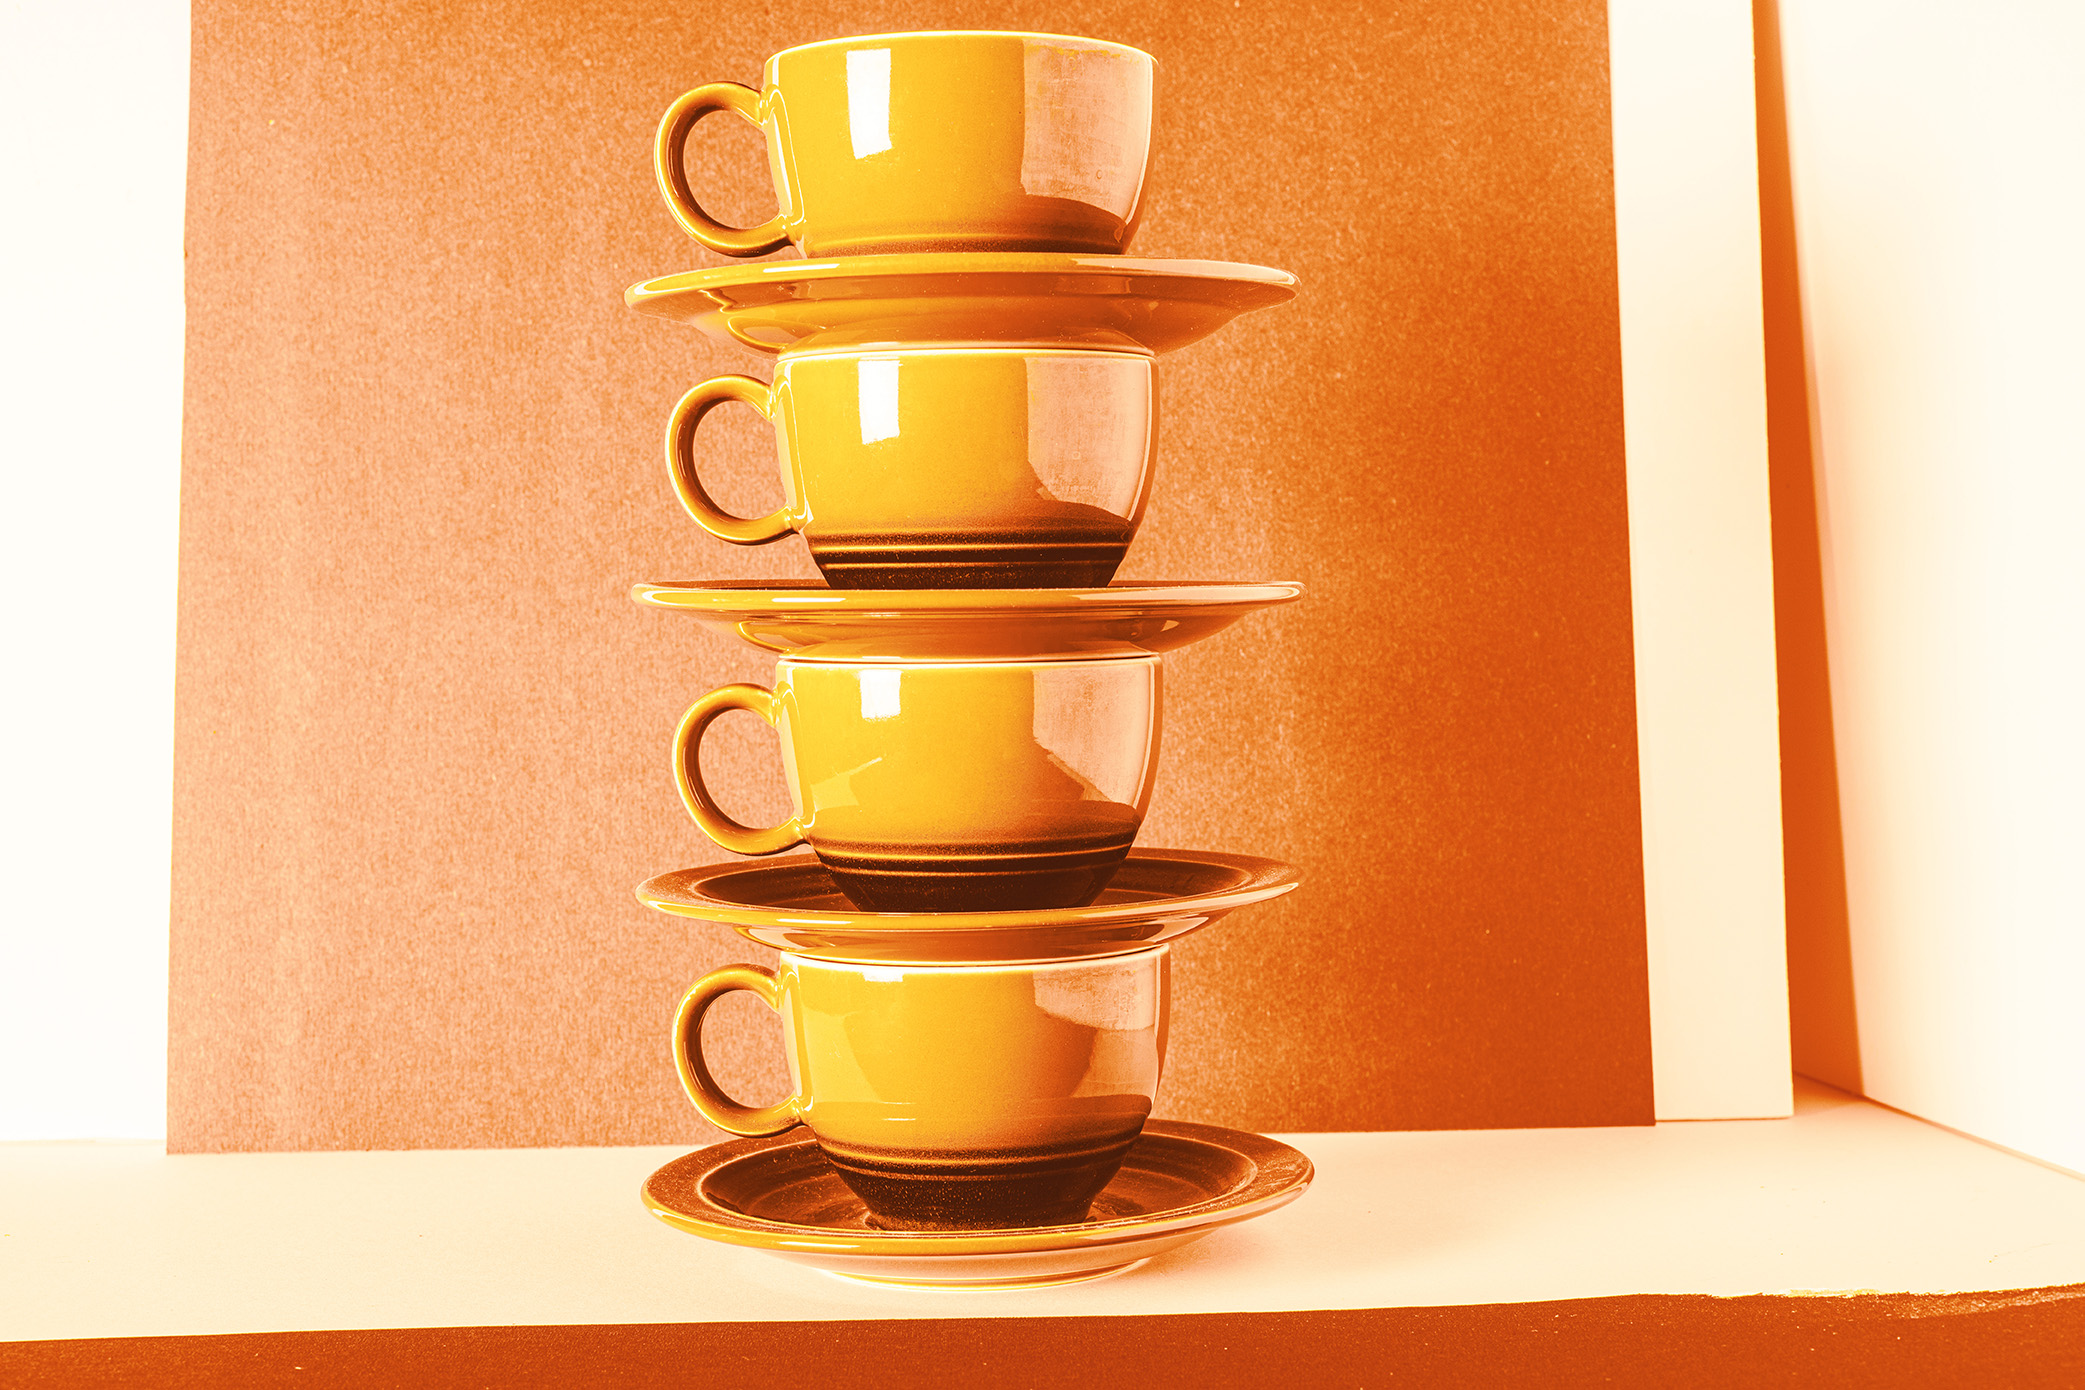 Impact report close-up photo of yellow orange teacups and saucers stacked on top of each other